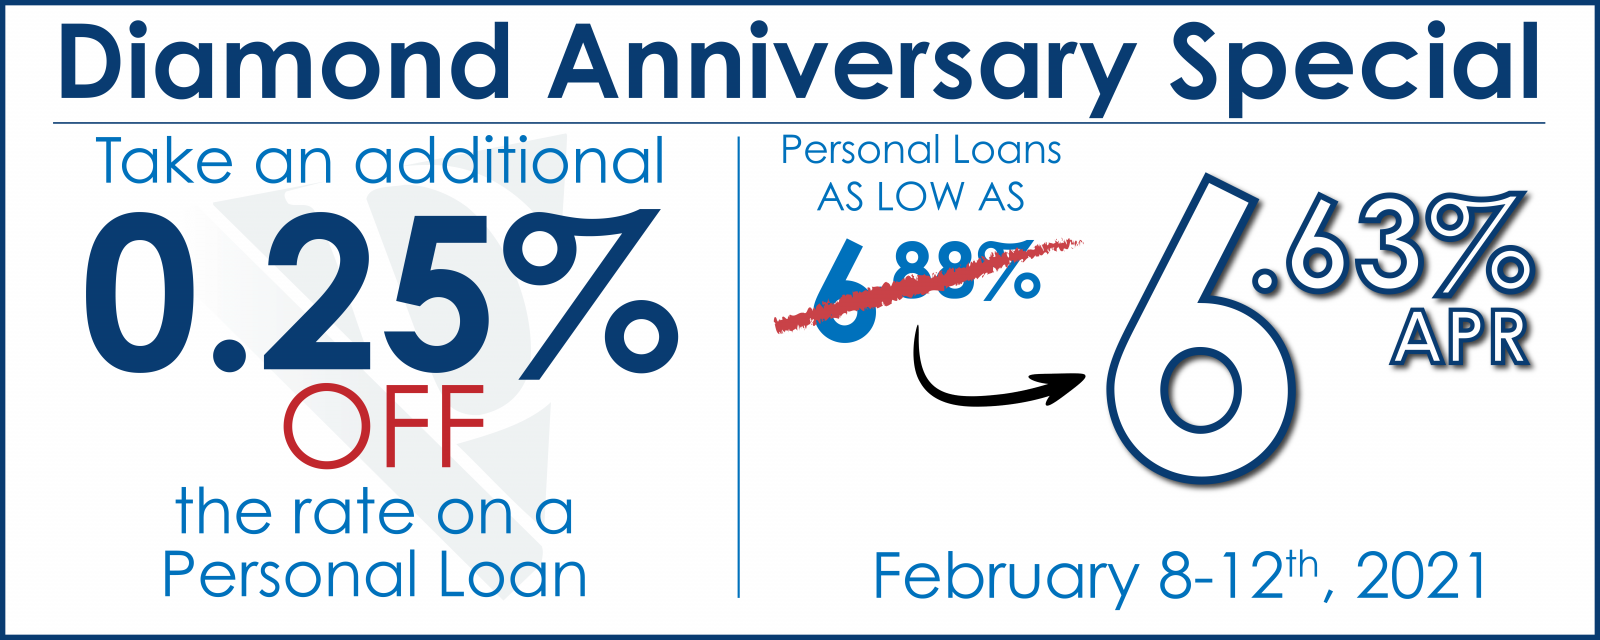 Get a 0.25% DISCOUNT on a Personal Loan from Diamond Valley! This week only!